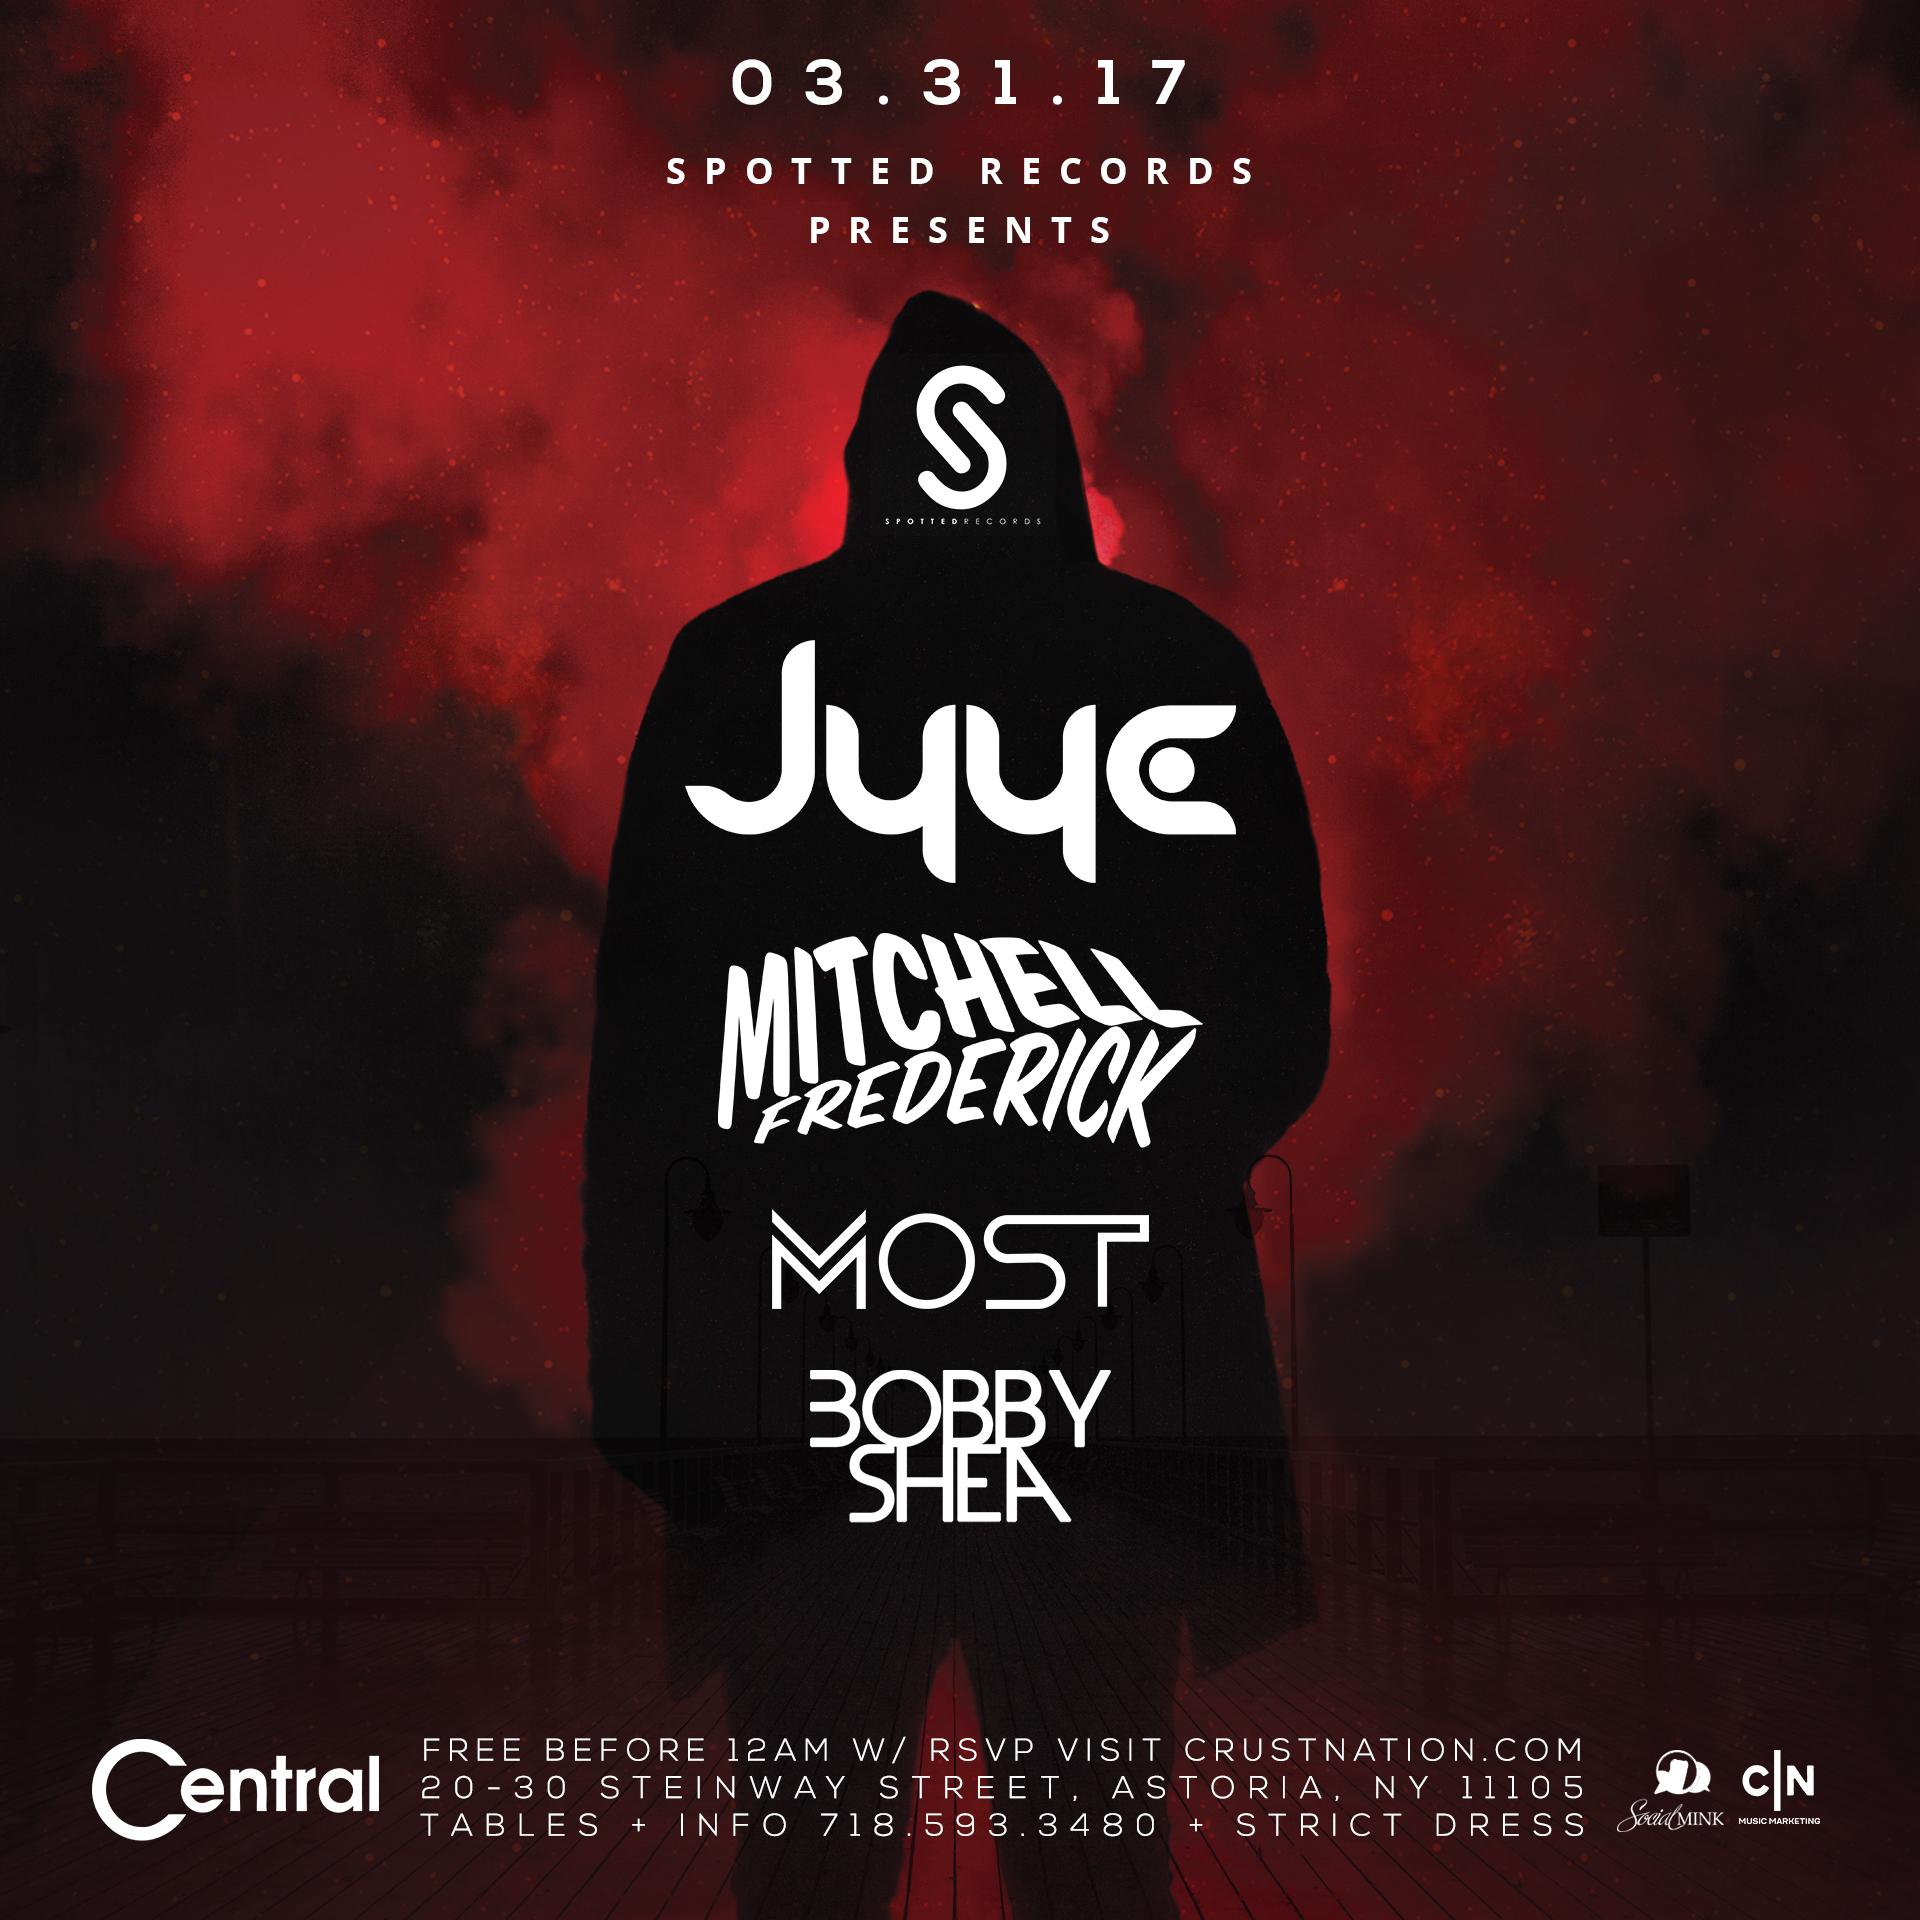 SPOTTED RECORDS SHOWCASE @ CENTRAL W/ JYYE, MITCHELL FREDERICK, MOST & BOBBY SHEA (ASTORIA, RSVP FOR FREE ADMISSION)